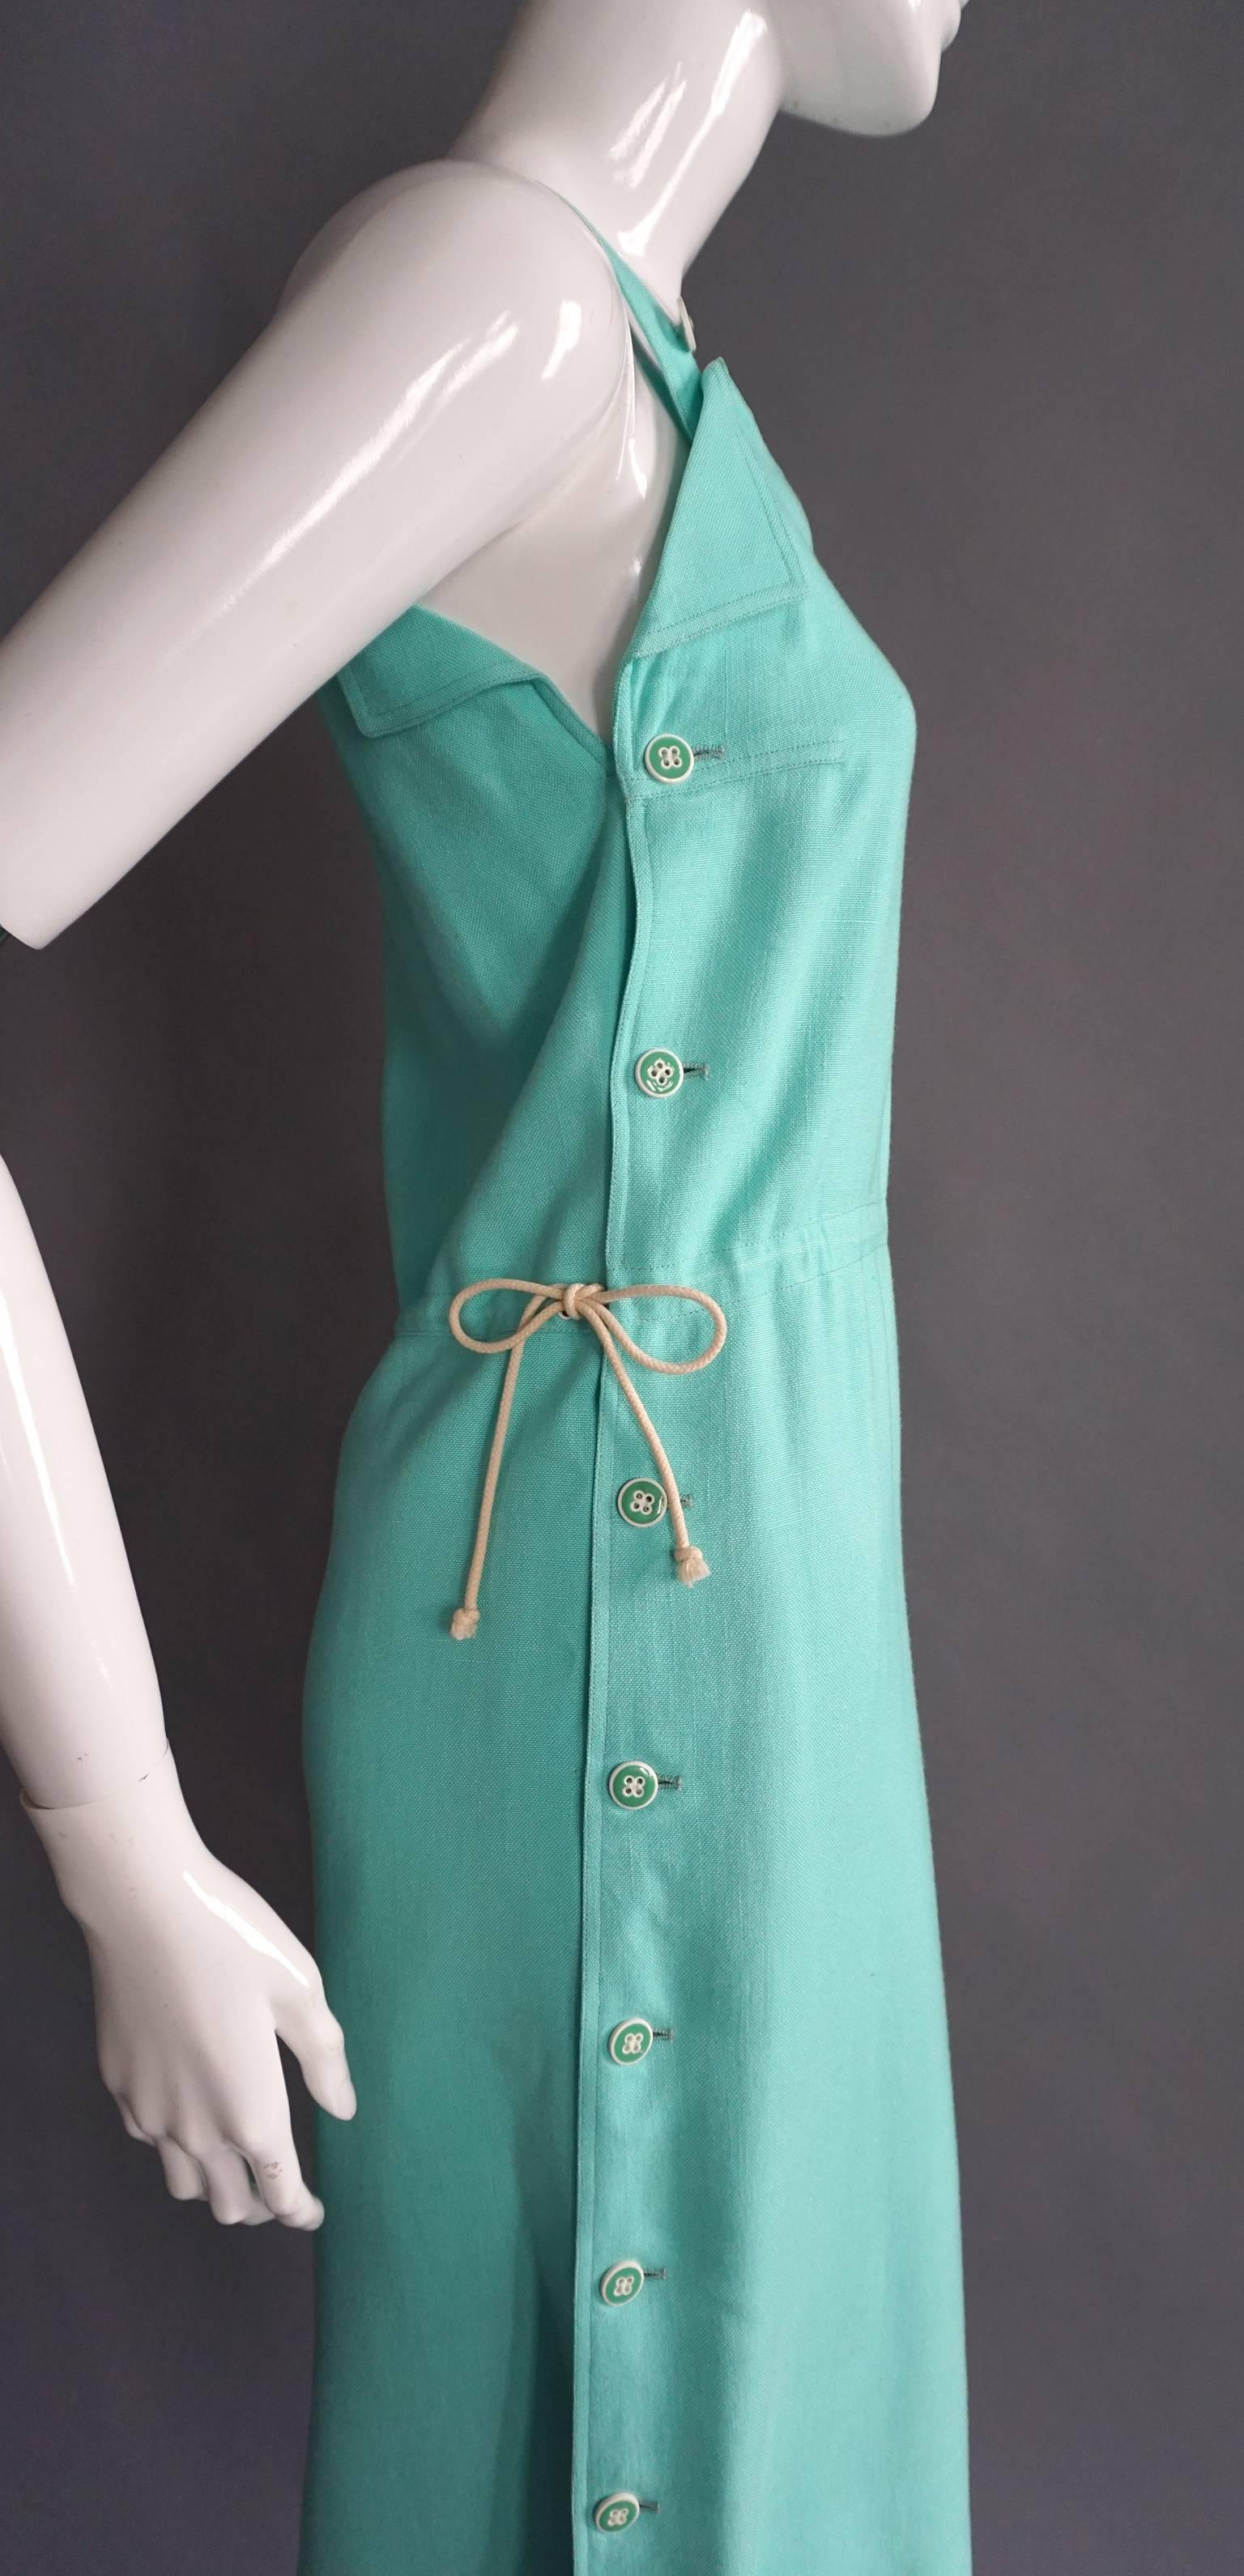 This COURREGES dress is made of a mint green colored, high quality cotton. The dress features straps that are adjustable with two buttons. Those buttons are repeated along the sides, securing the front to the back. The drawstring waist is tied on